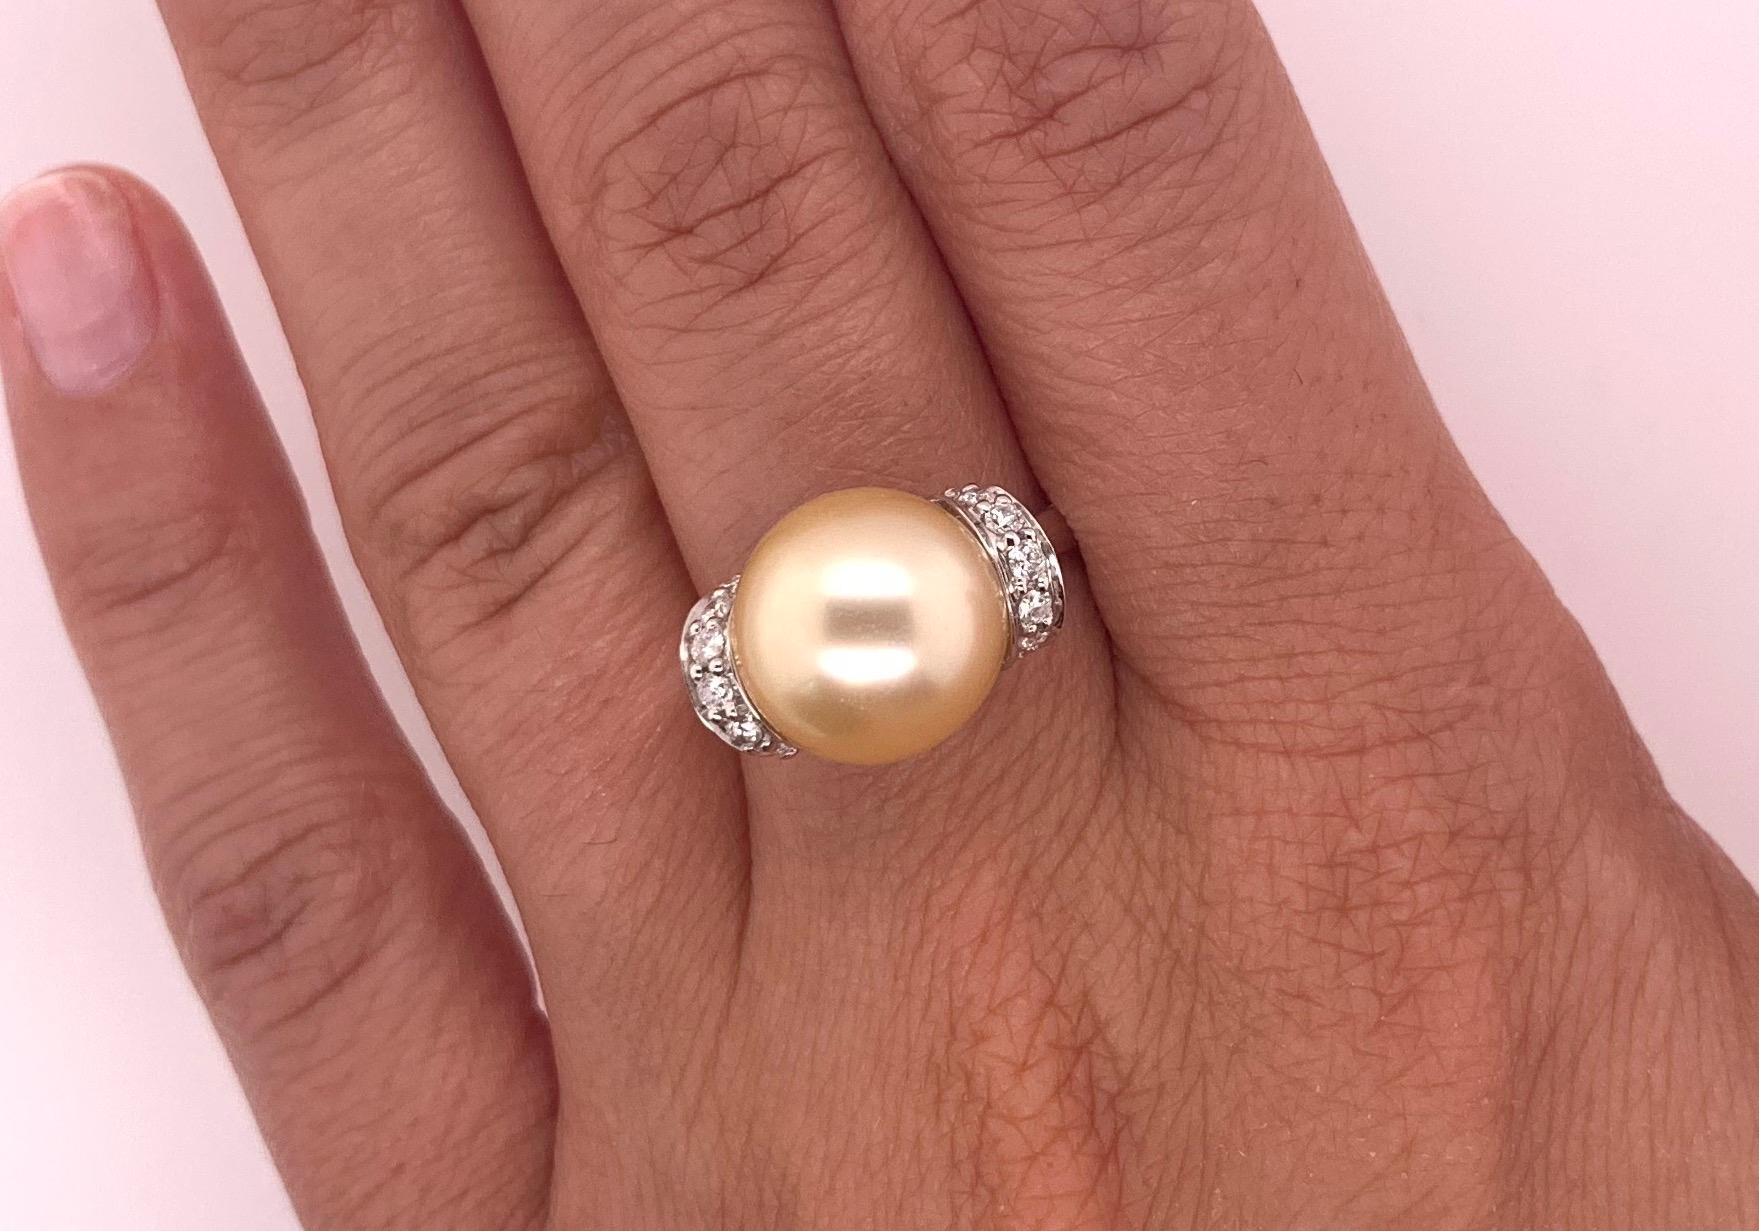 Material: 14K White Gold
Gemstone Details: 1 Round Pearl at 11.50 Carats Total
Diamond Details: Brilliant Round White Diamonds at 0.24 Carats. SI Clarity / H-I Color. 

Ring Size: 6.75. Alberto offers complimentary sizing on all rings.

Fine